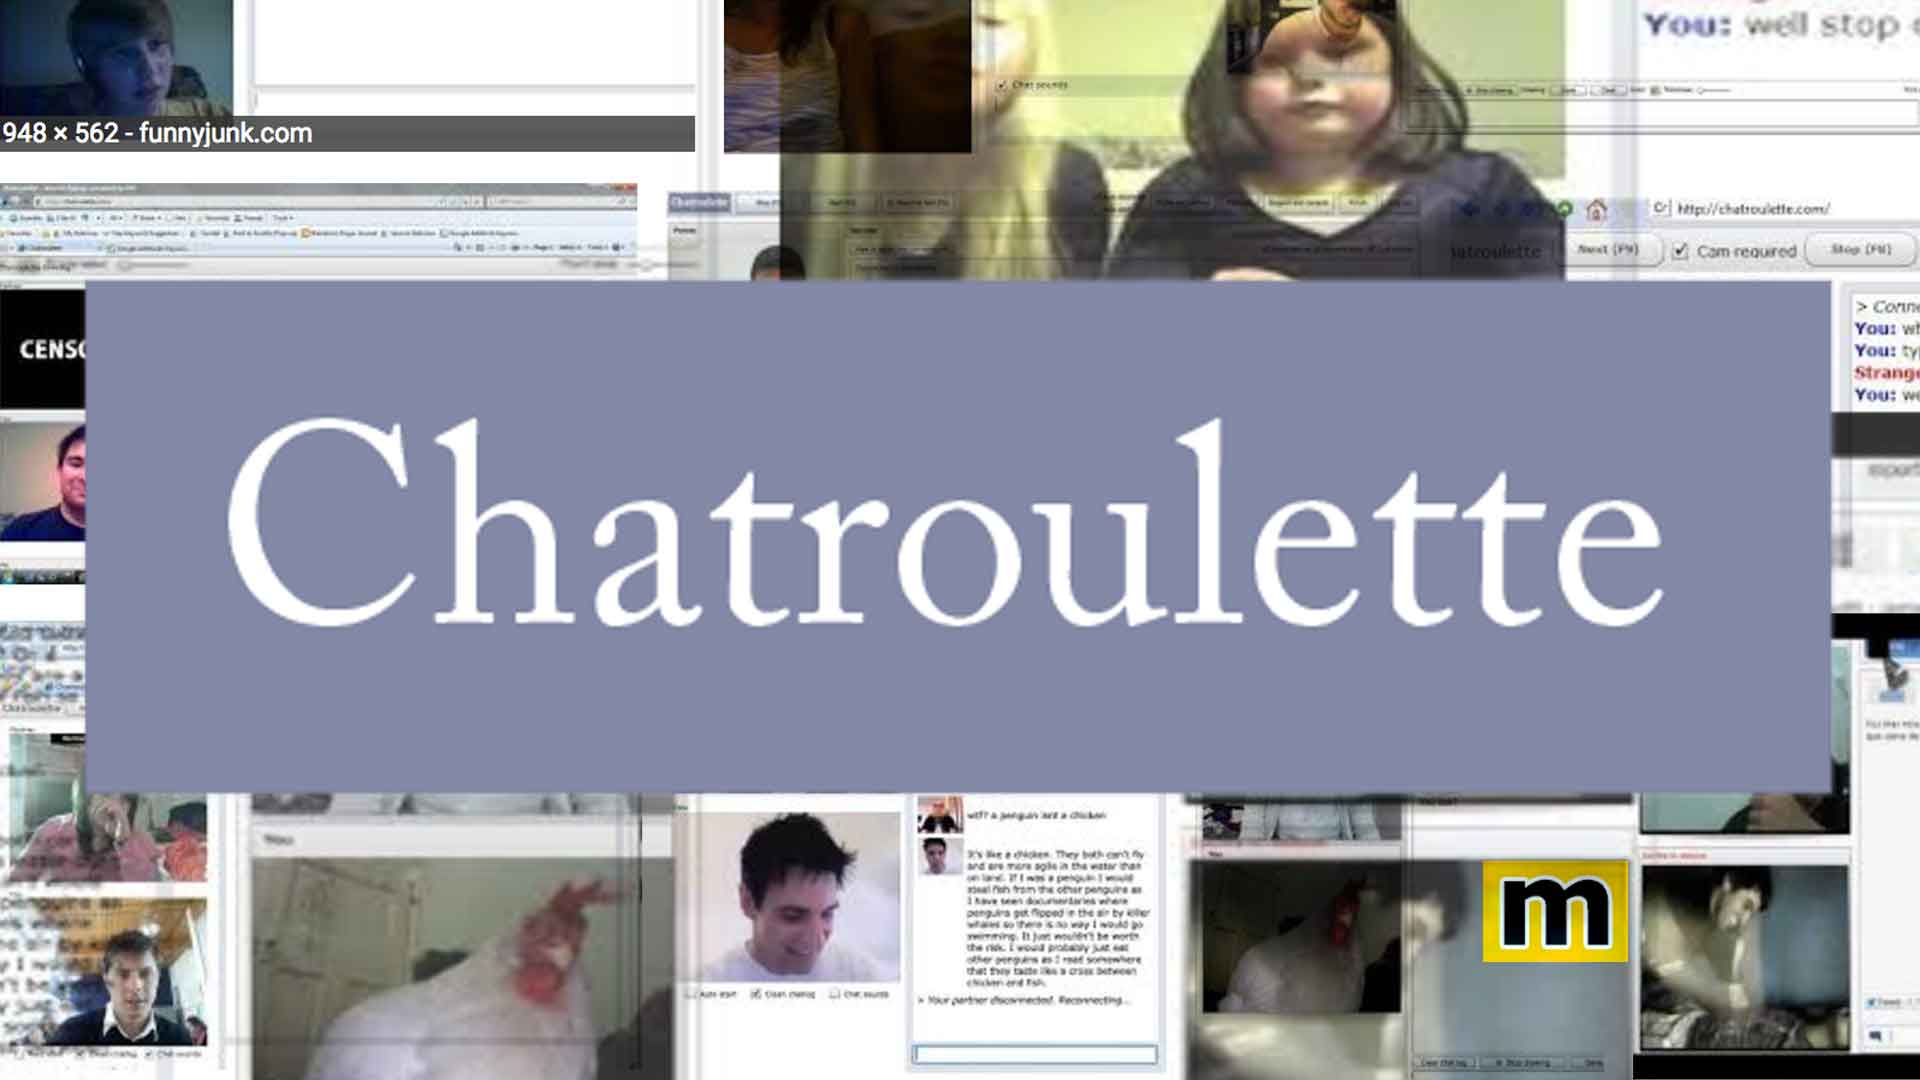 Chatroulette - Pedophile Paradise or The Next Big Thing